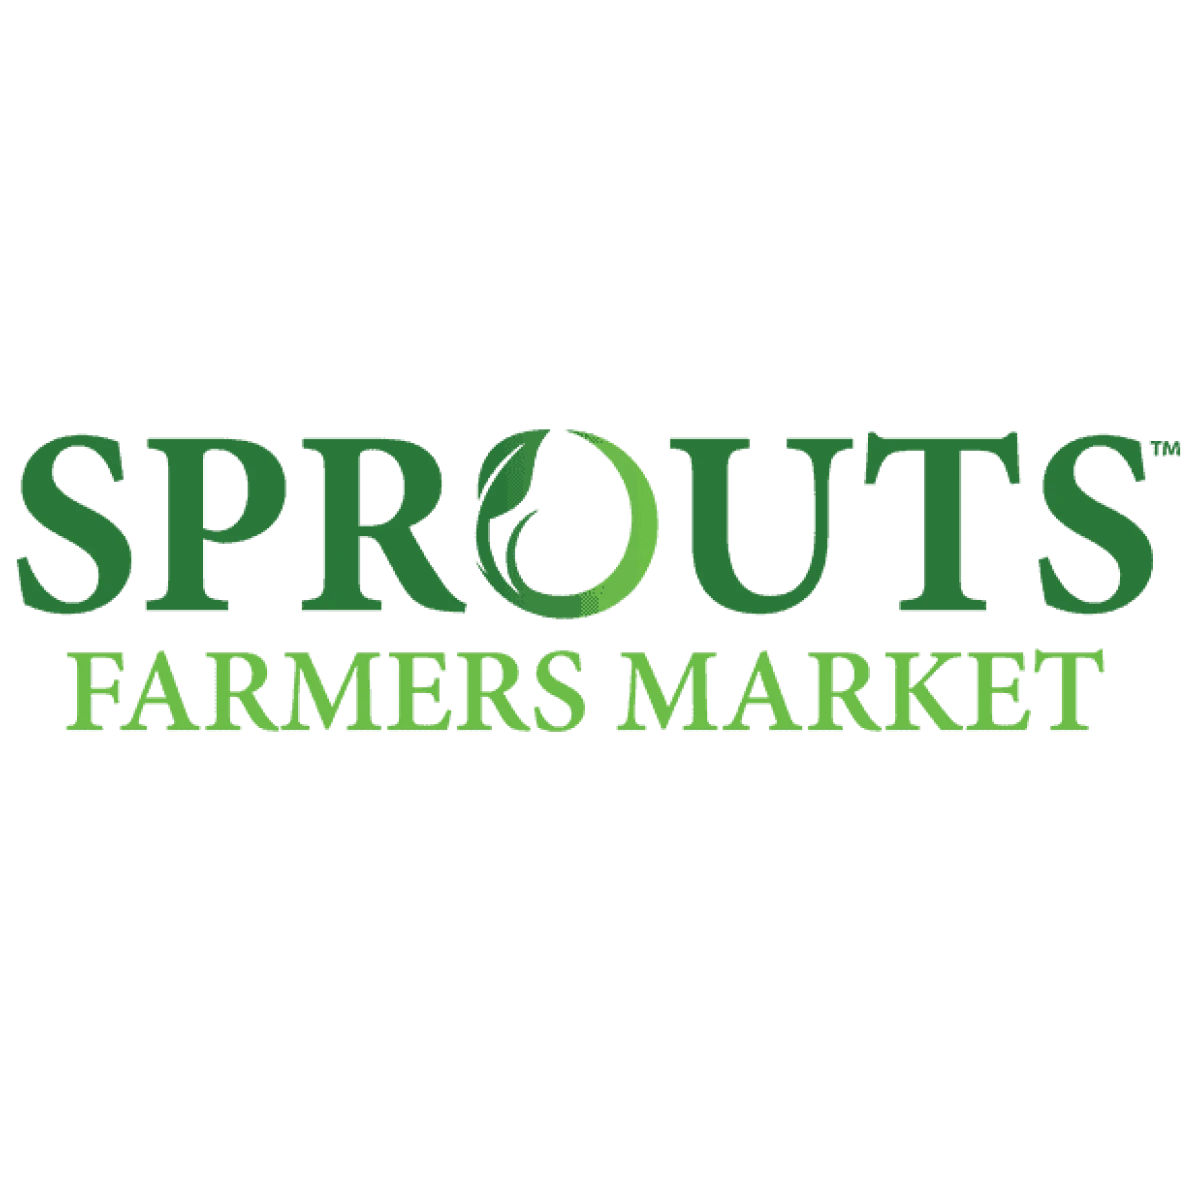 Sprouts Farmer's Market, the retailer - logo - this link takes you to the Impossible Foods landing page promoting Target as a retailer to purchase Impossible products from